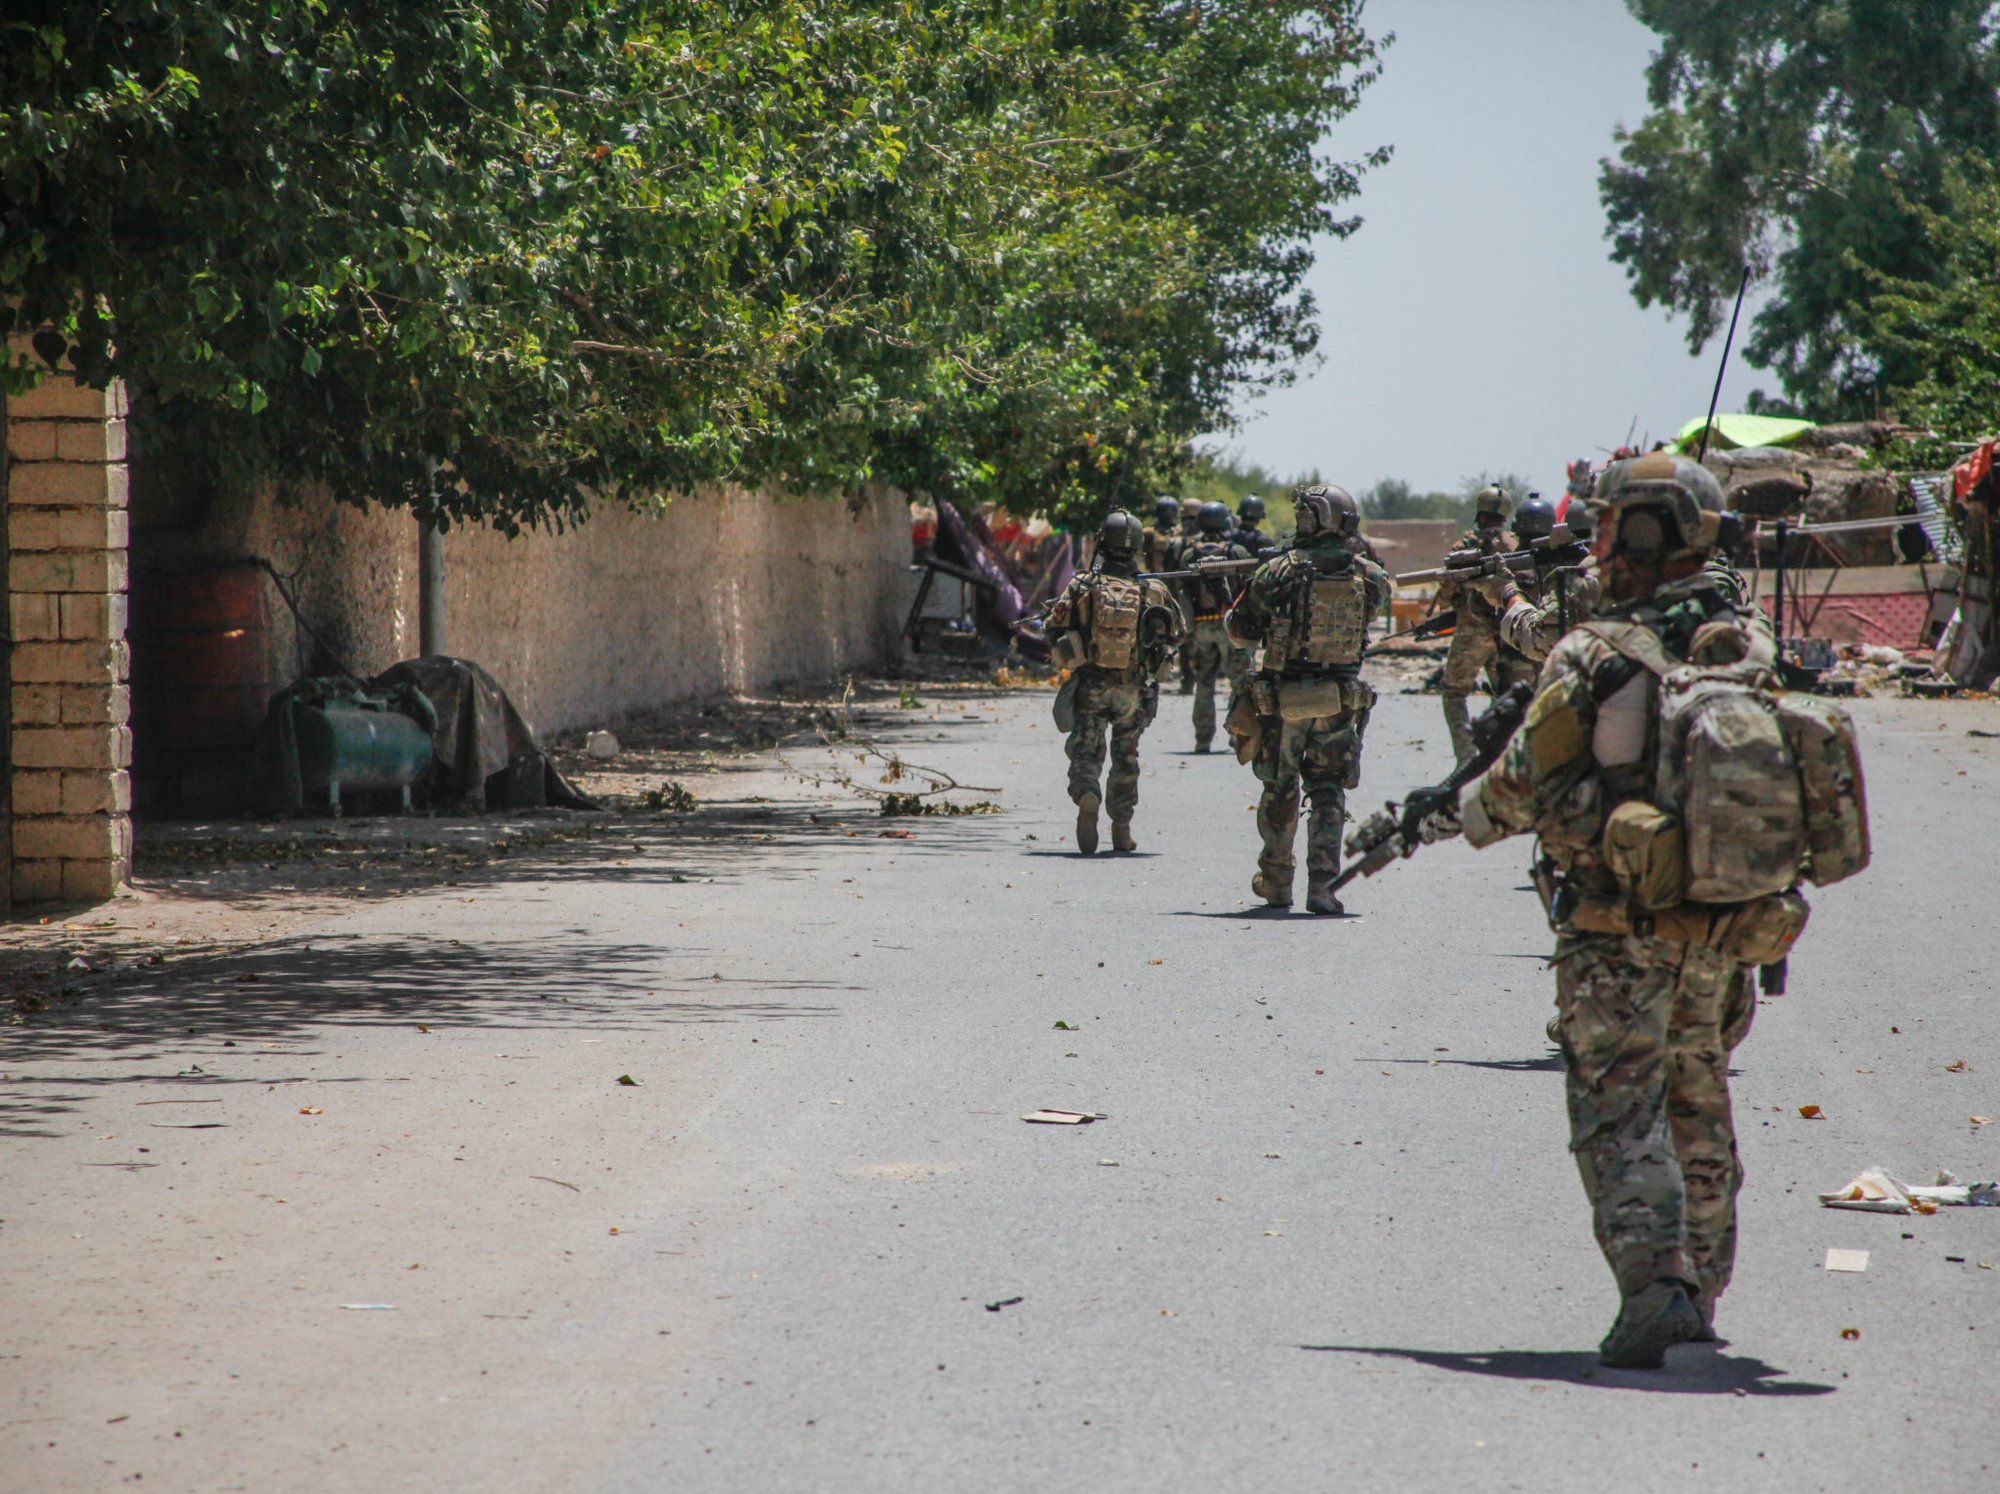 U.S. Special Forces Soldiers, attached to Special Operations Task Force-Afghanistan, along side Afghan National Army Commandos, from 7th and 9th Special Operations Kandak, clear a large alleyway during an operation in the Chanjir district, Helmand province, Afghanistan, Aug. 23, 2016.  The operation was conducted to help Afghan Partner units take back a district center that was overrun by the Taliban in the area. (U.S. Army photo by Sgt. Connor Mendez/Reviewed)